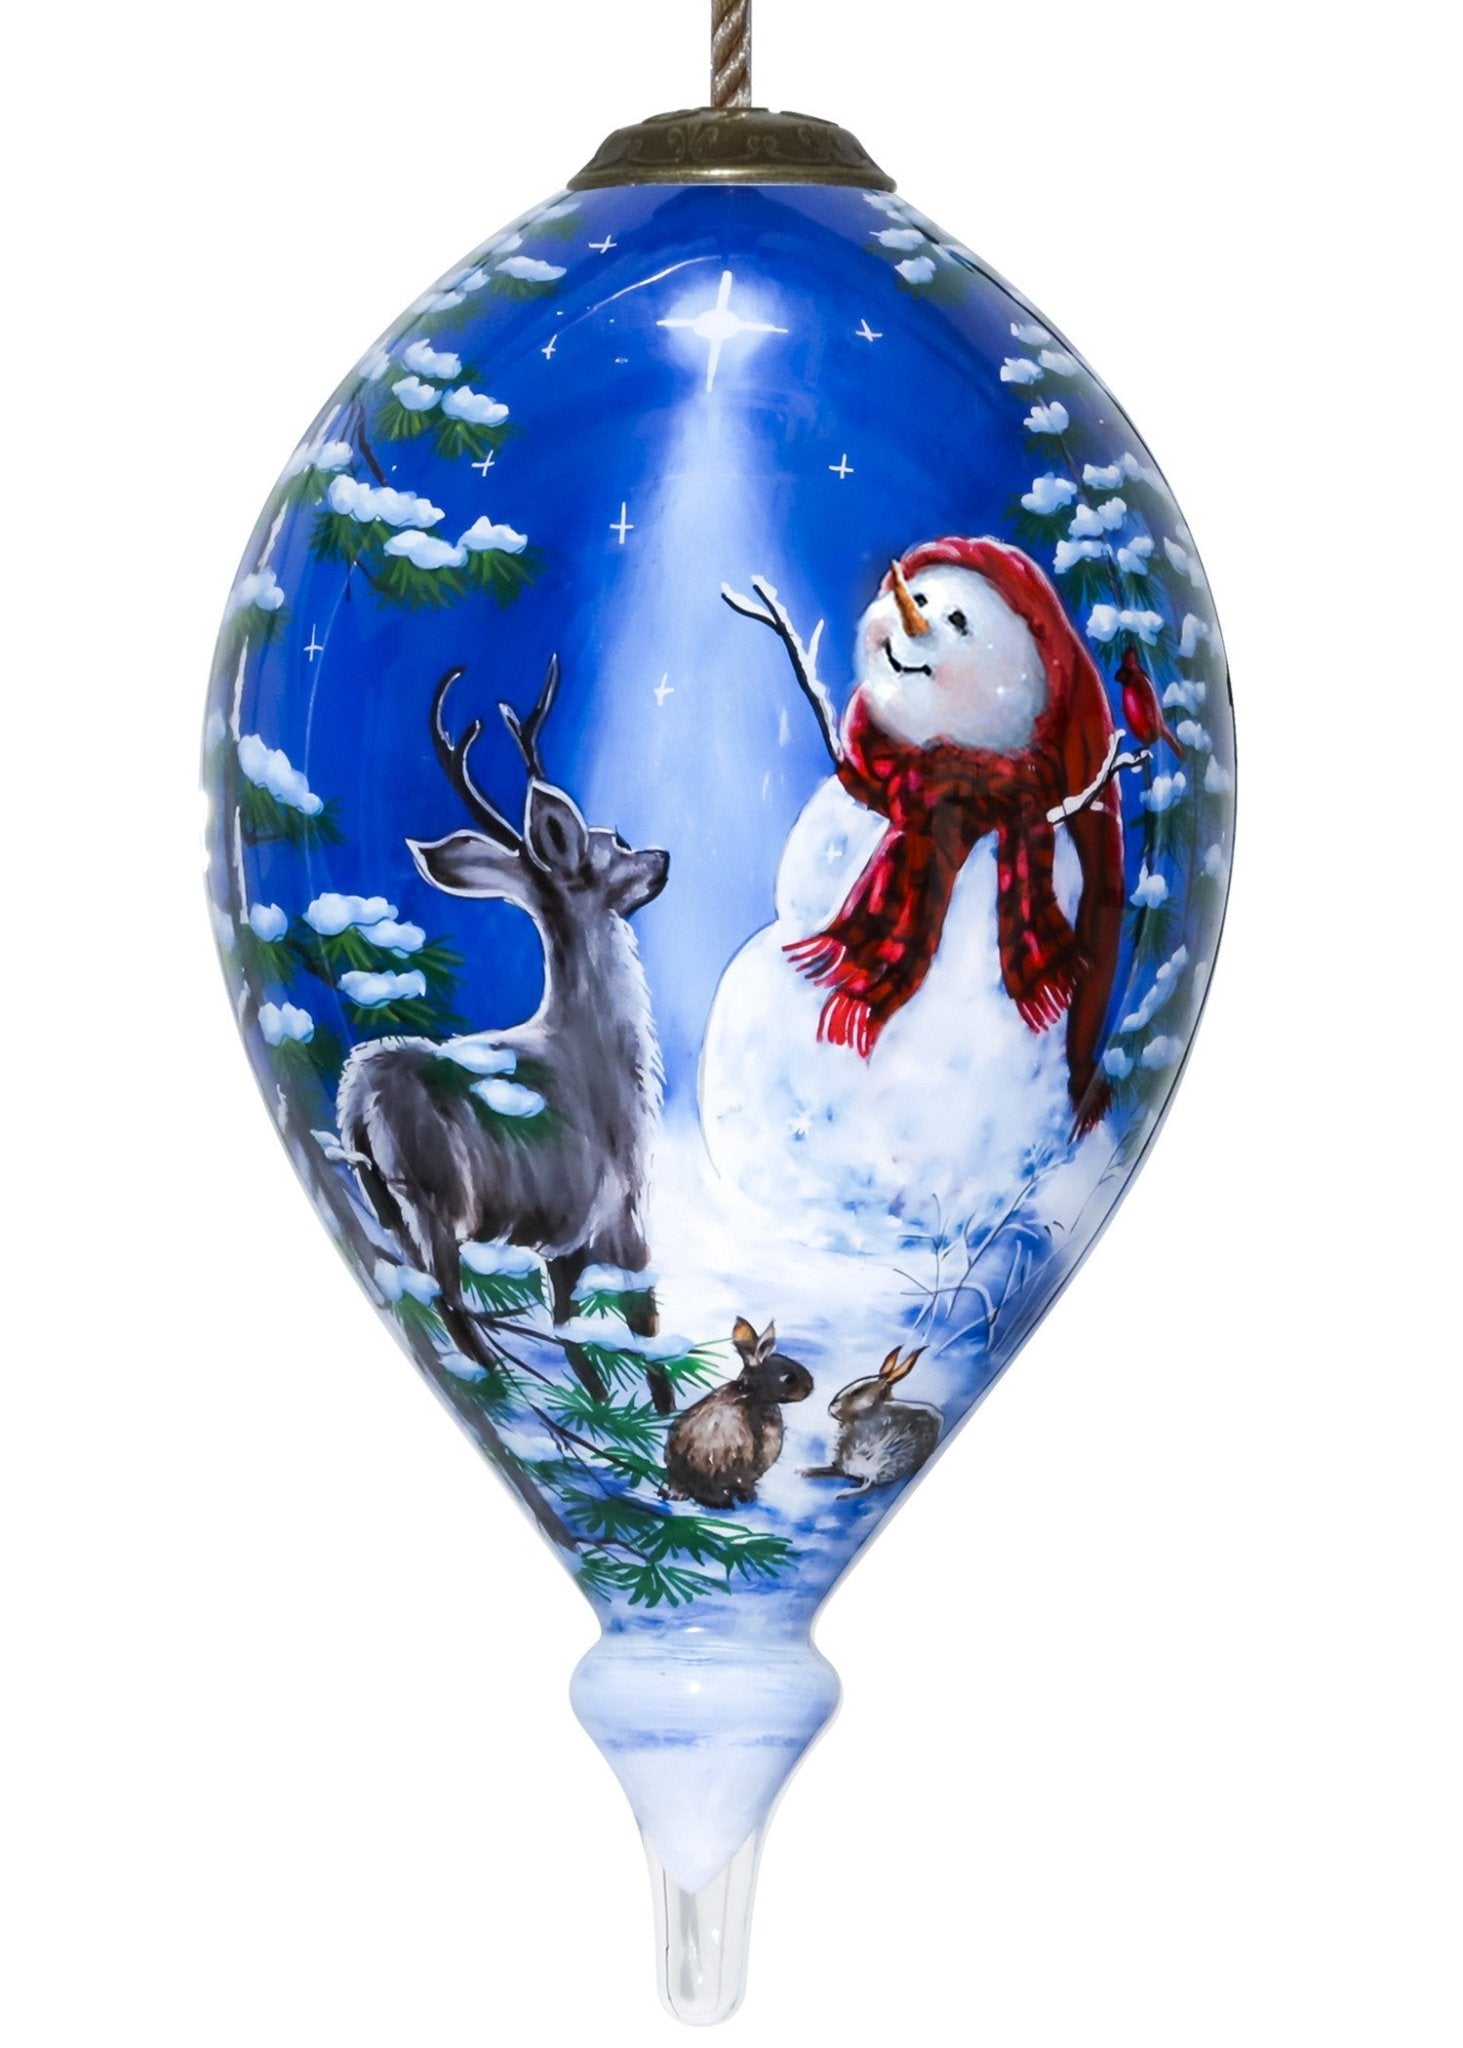 Starry-Heaven-and-Snowman-Hand-Painted-Mouth-Blown-Glass-Ornament-Christmas-Ornaments